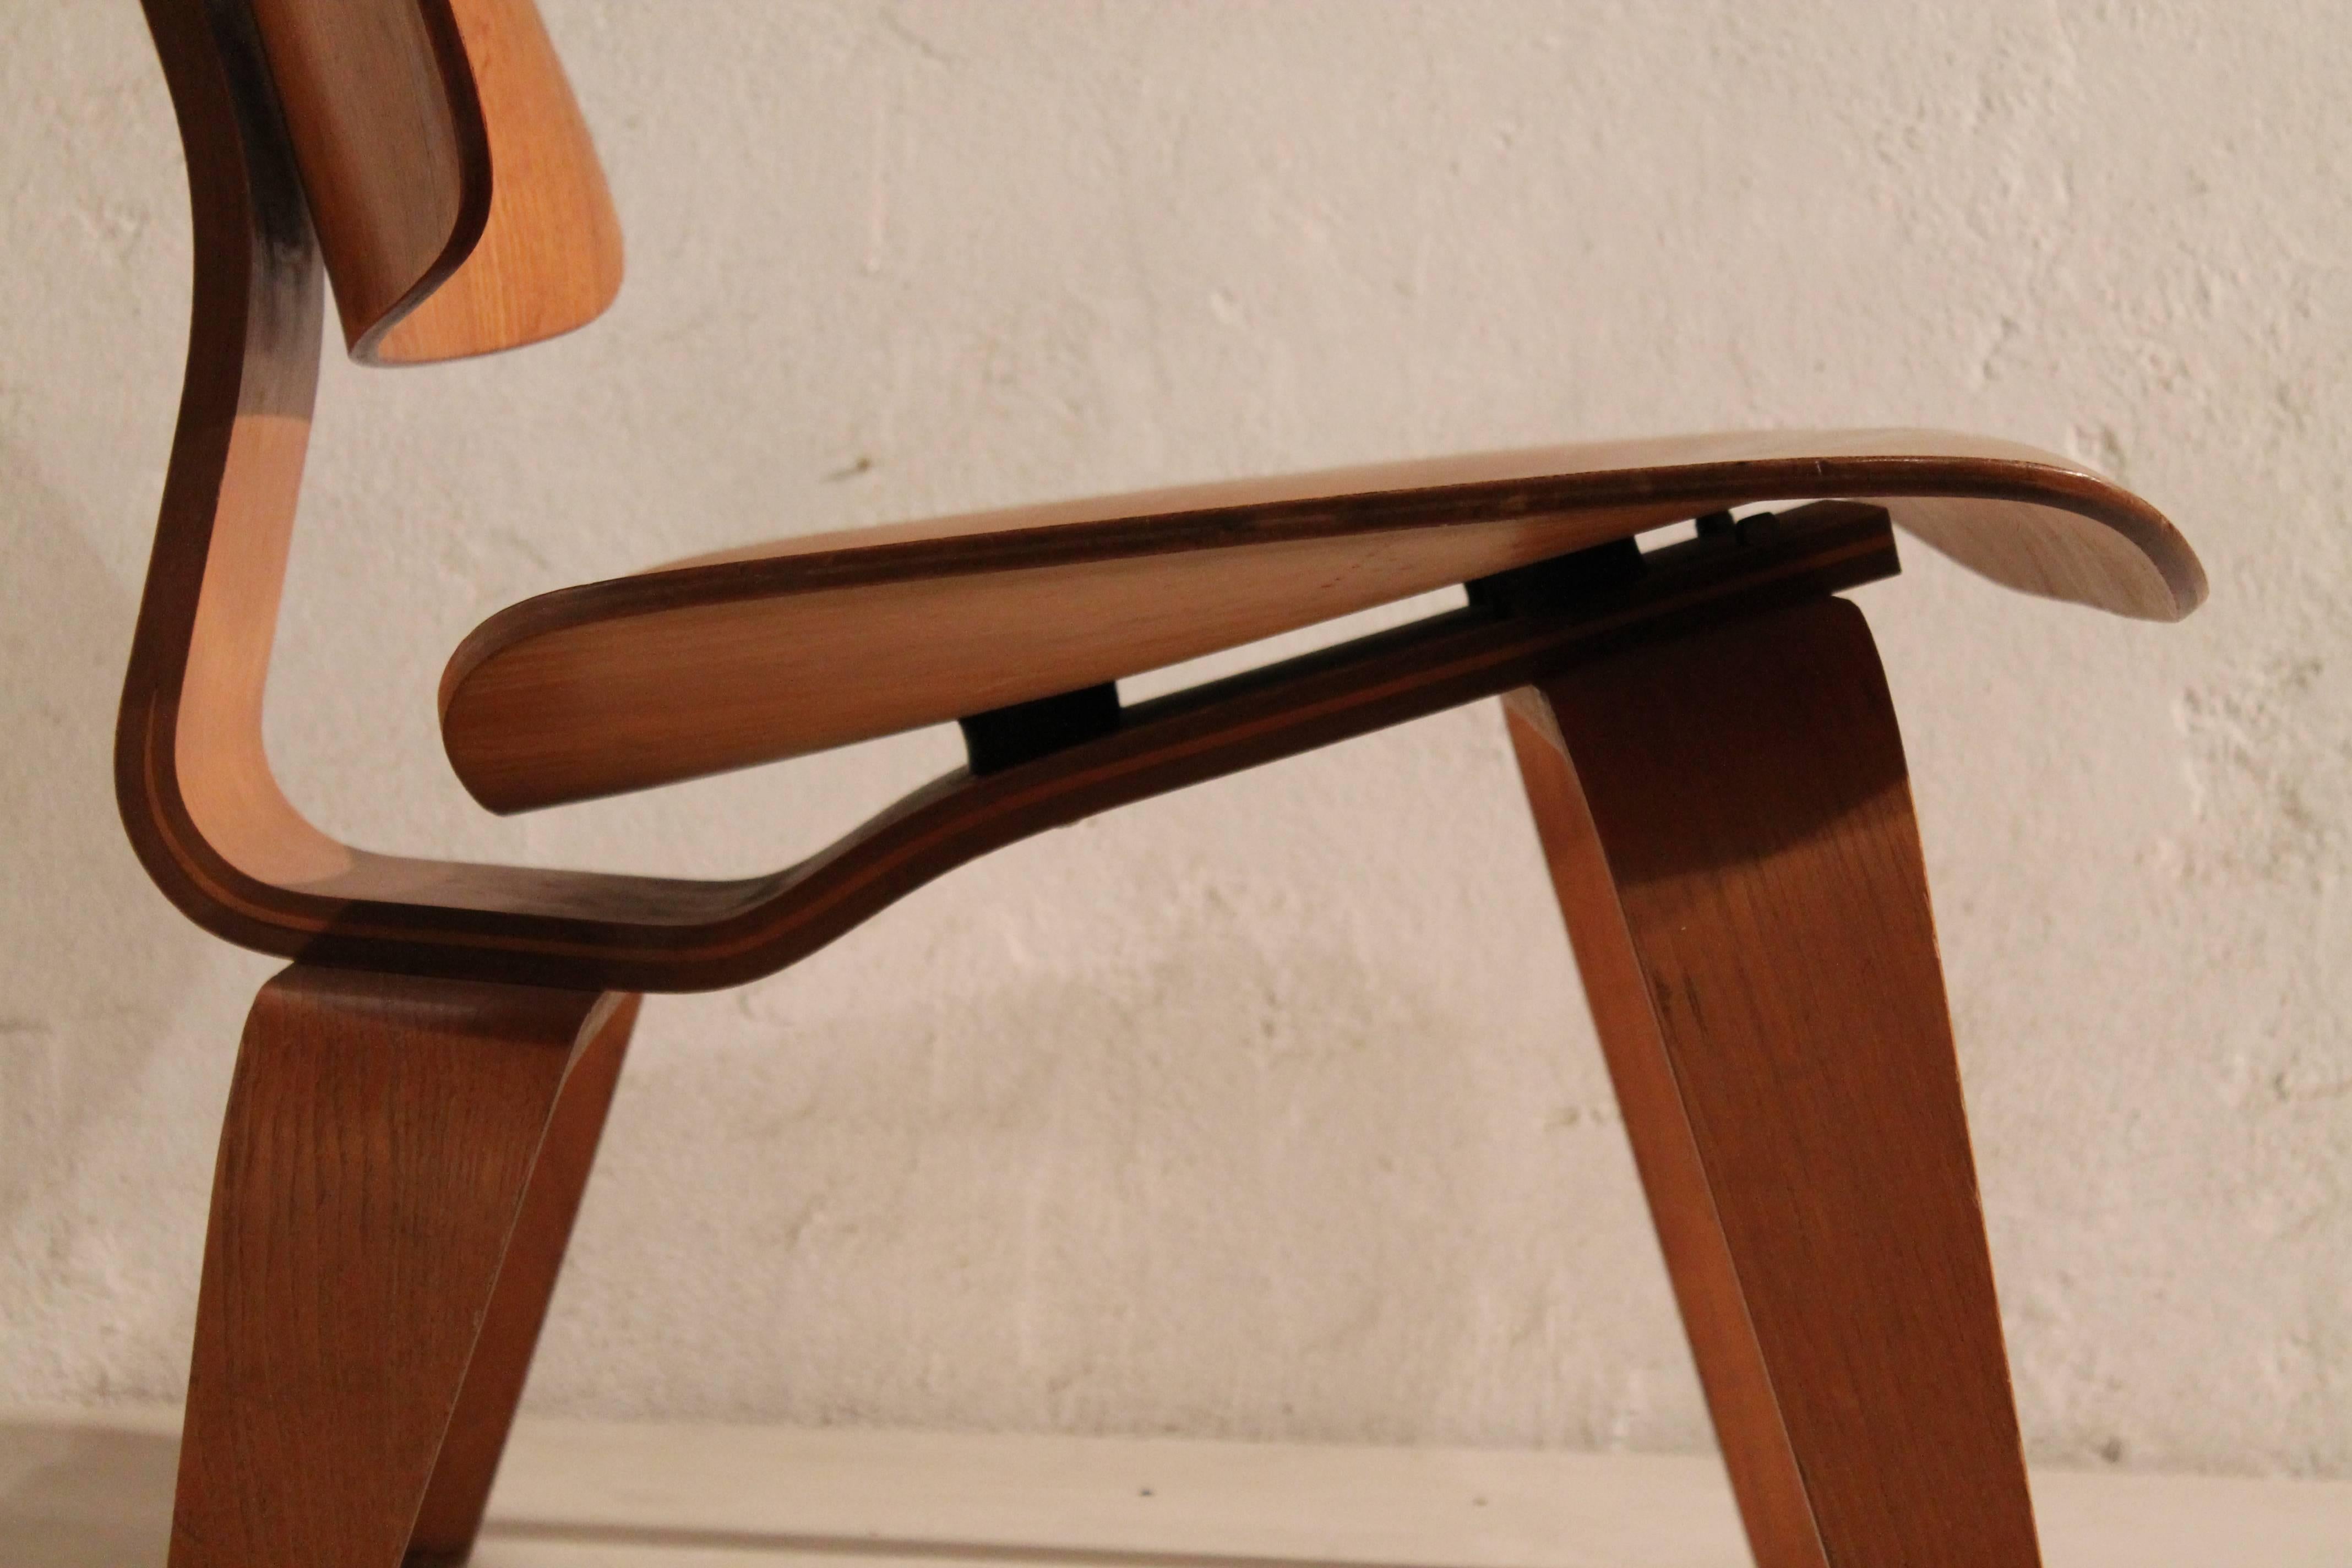 LCW chair by Eames for Herman Miller, 1950s.

Good original condition.